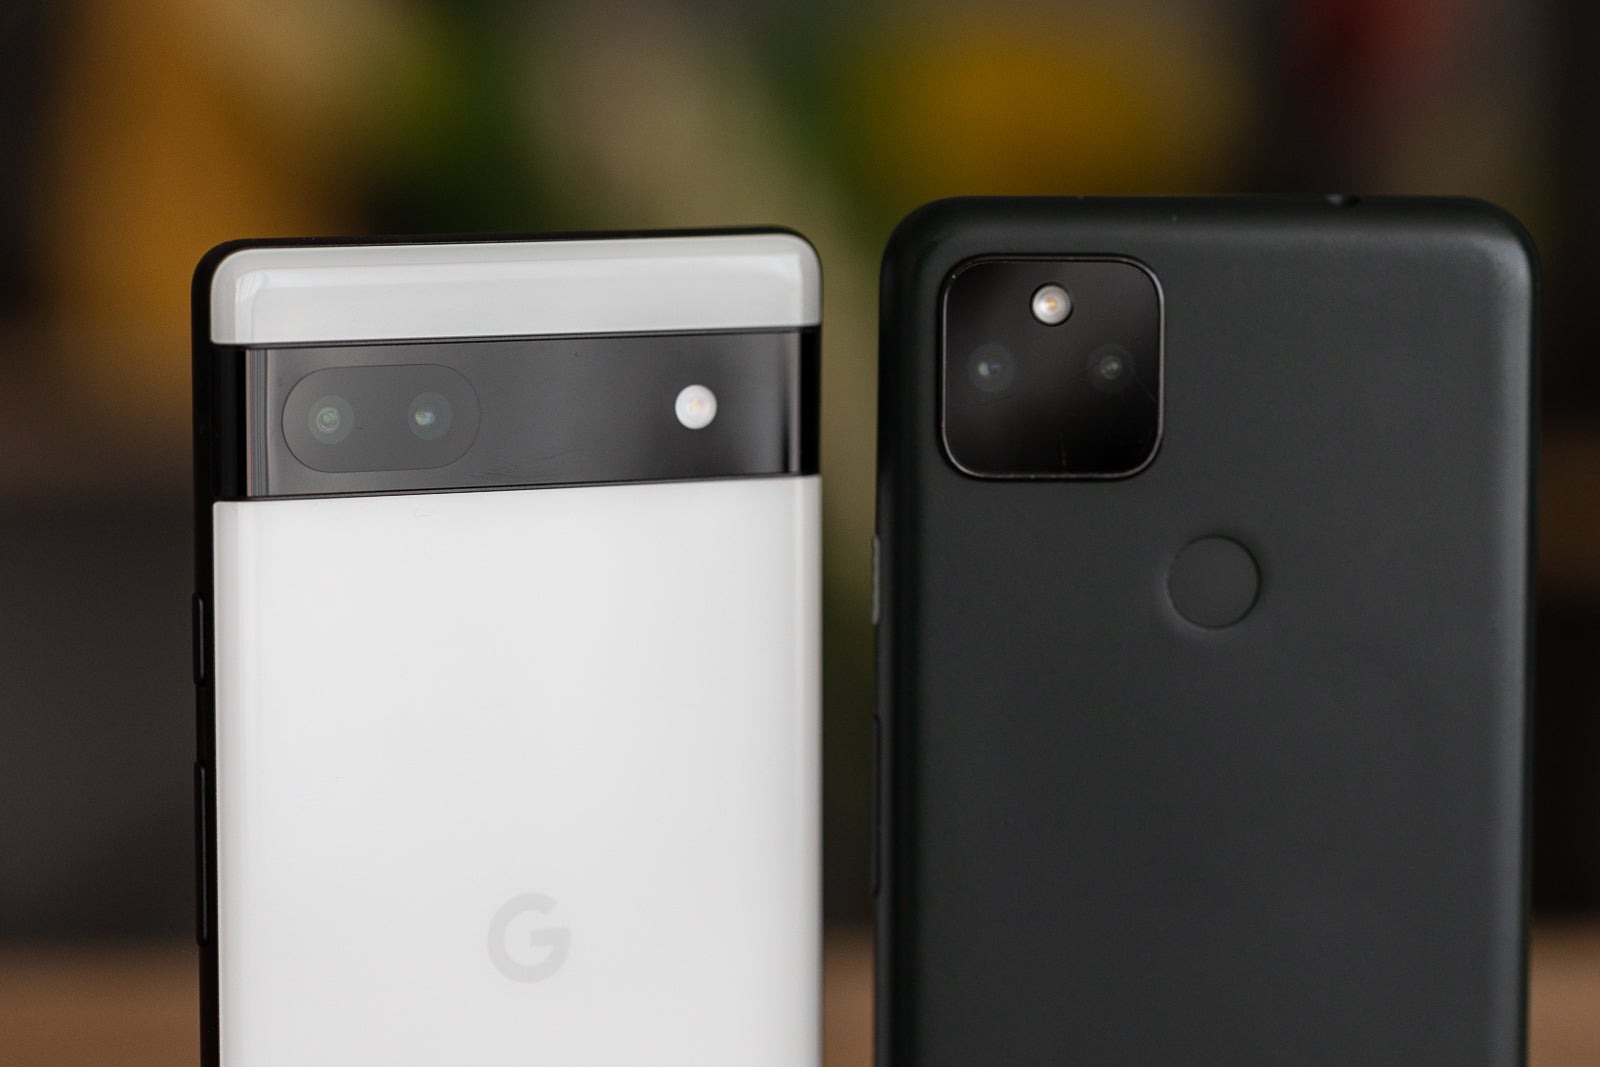 The Pixel 6a's horizontal camera module (left) and Pixel 5a's square one (right) - Google Pixel 6a vs Pixel 5a comparison: Twice the performance!